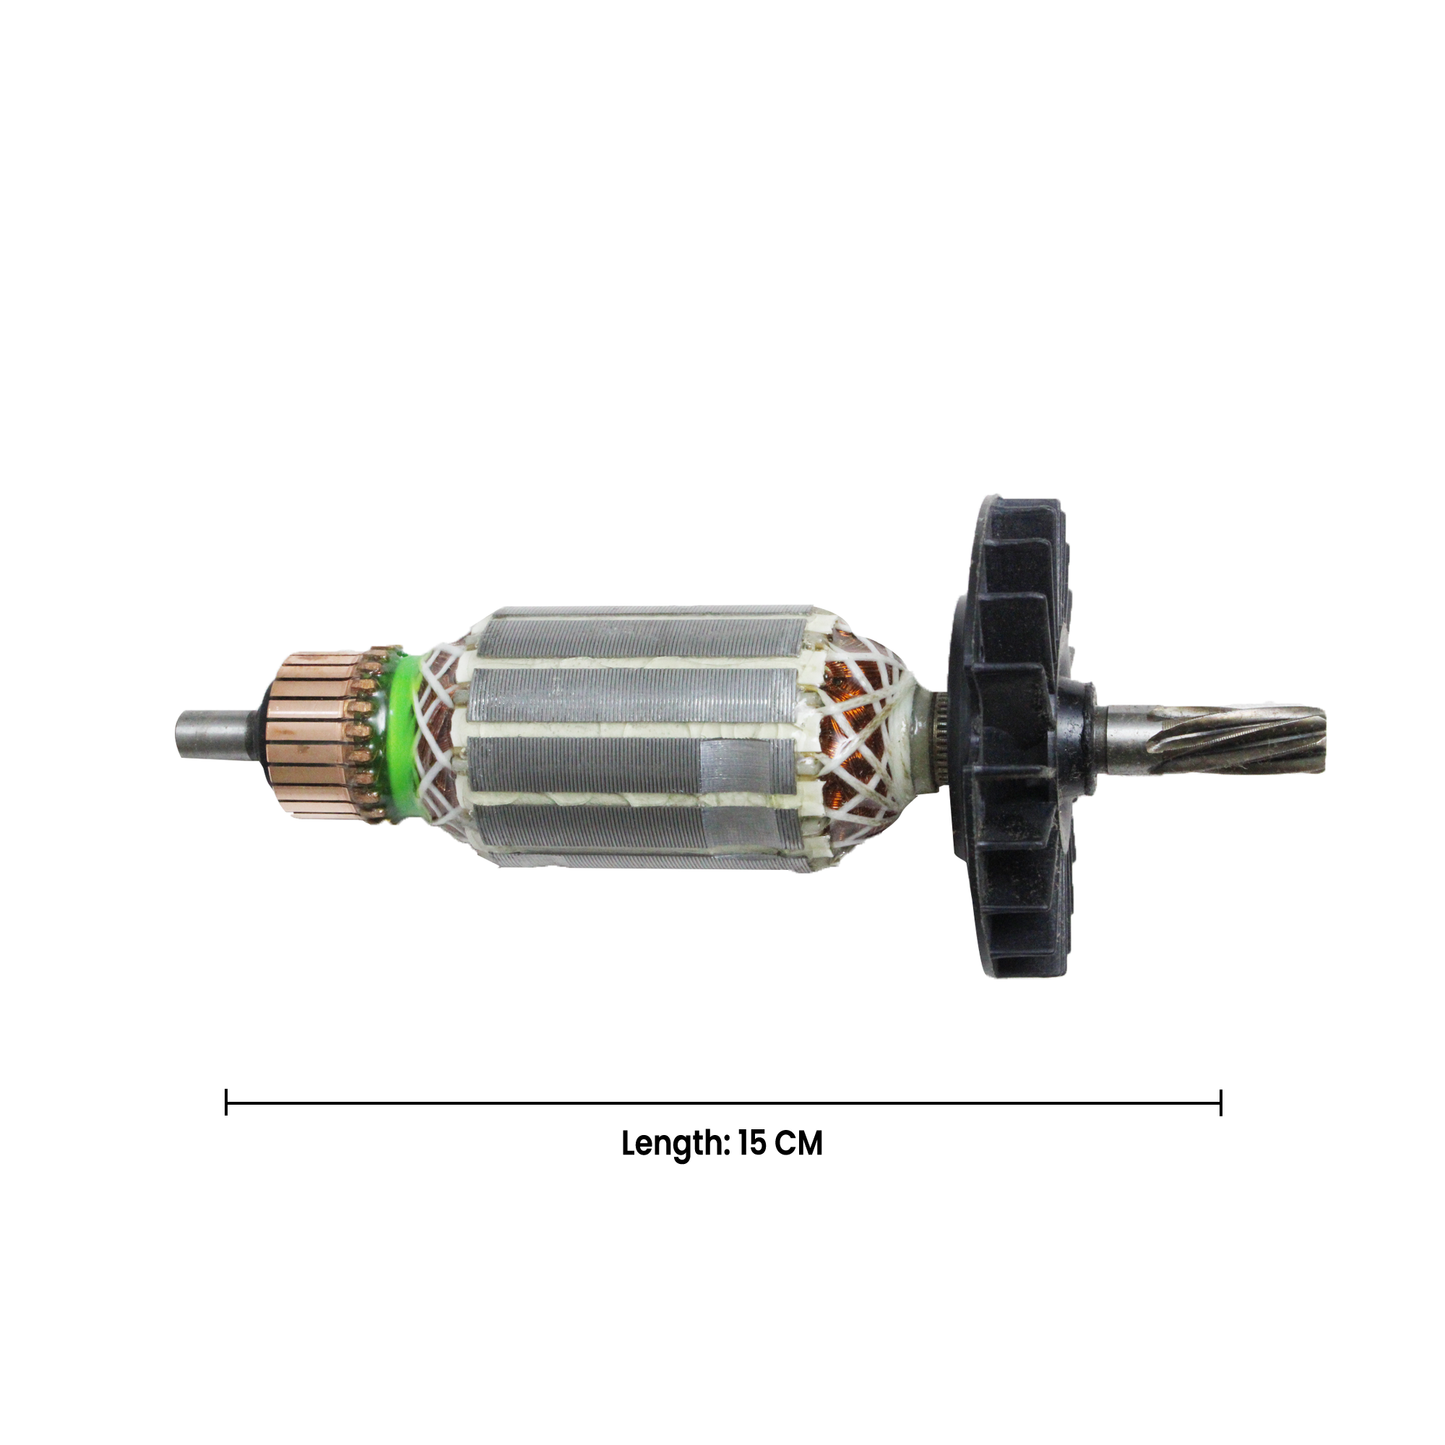 AEGON ACWF2-26 Copper Armature - Compatible with Aegon AHD263 26mm Rotary Hammer and Other Interchangable Rotary Hammer Models